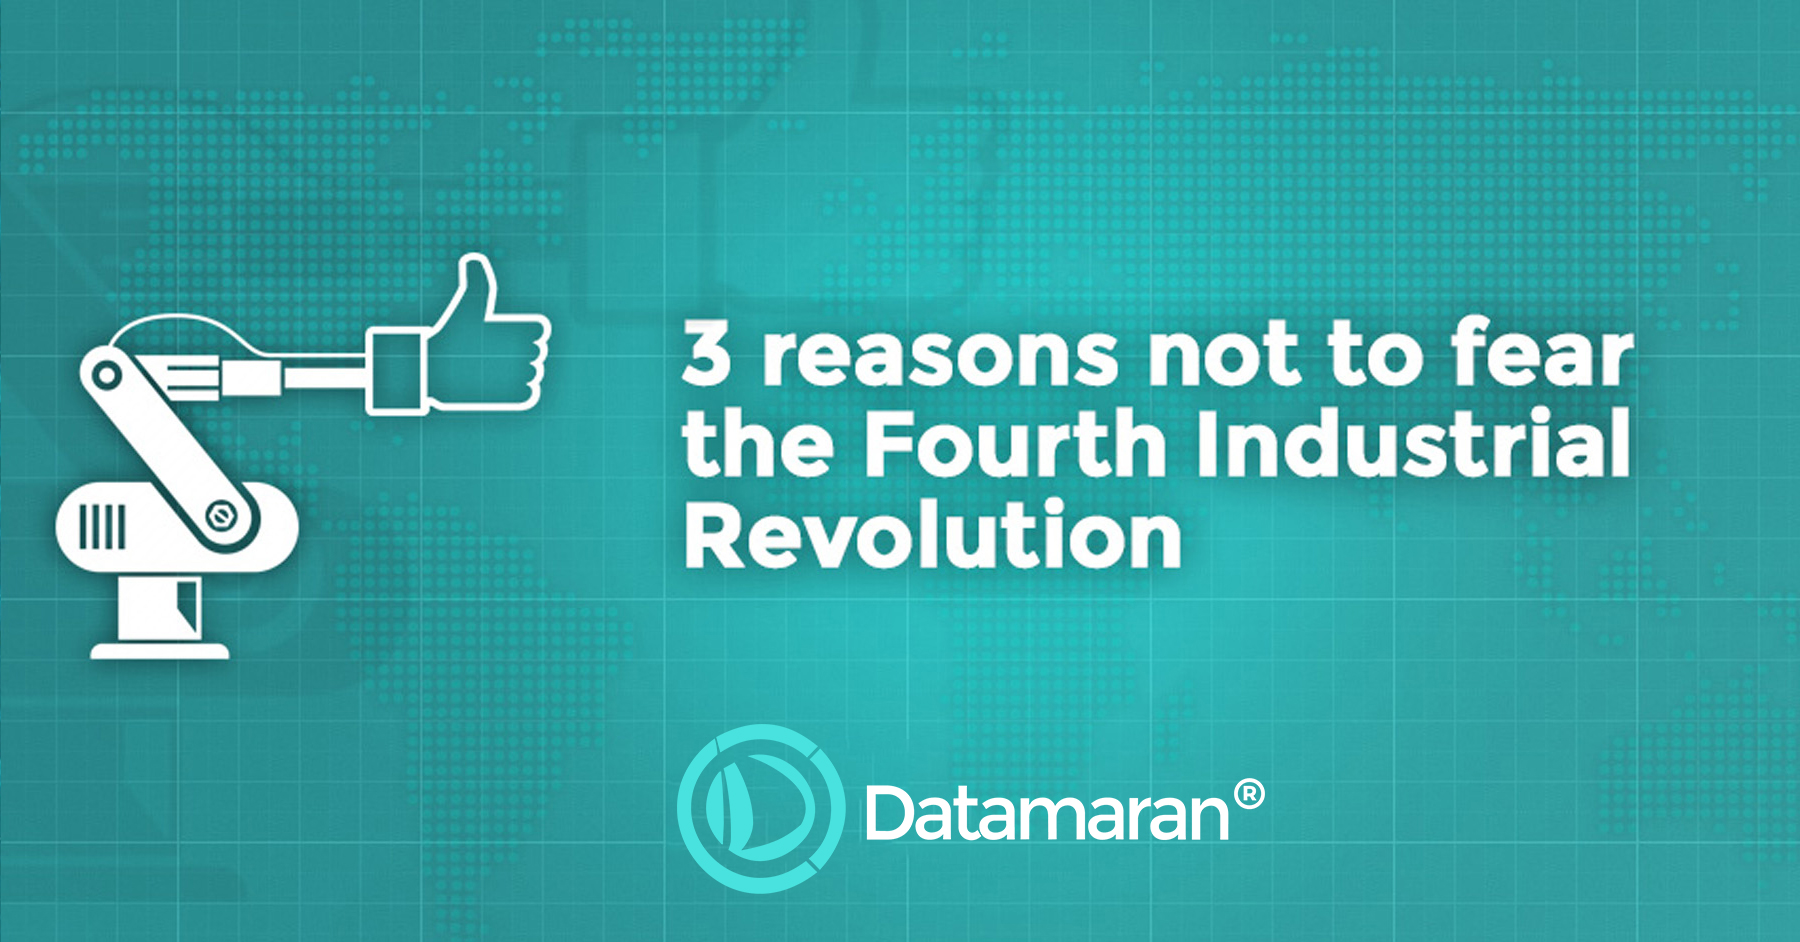 The fourth industrial revolution what it means and how to respond